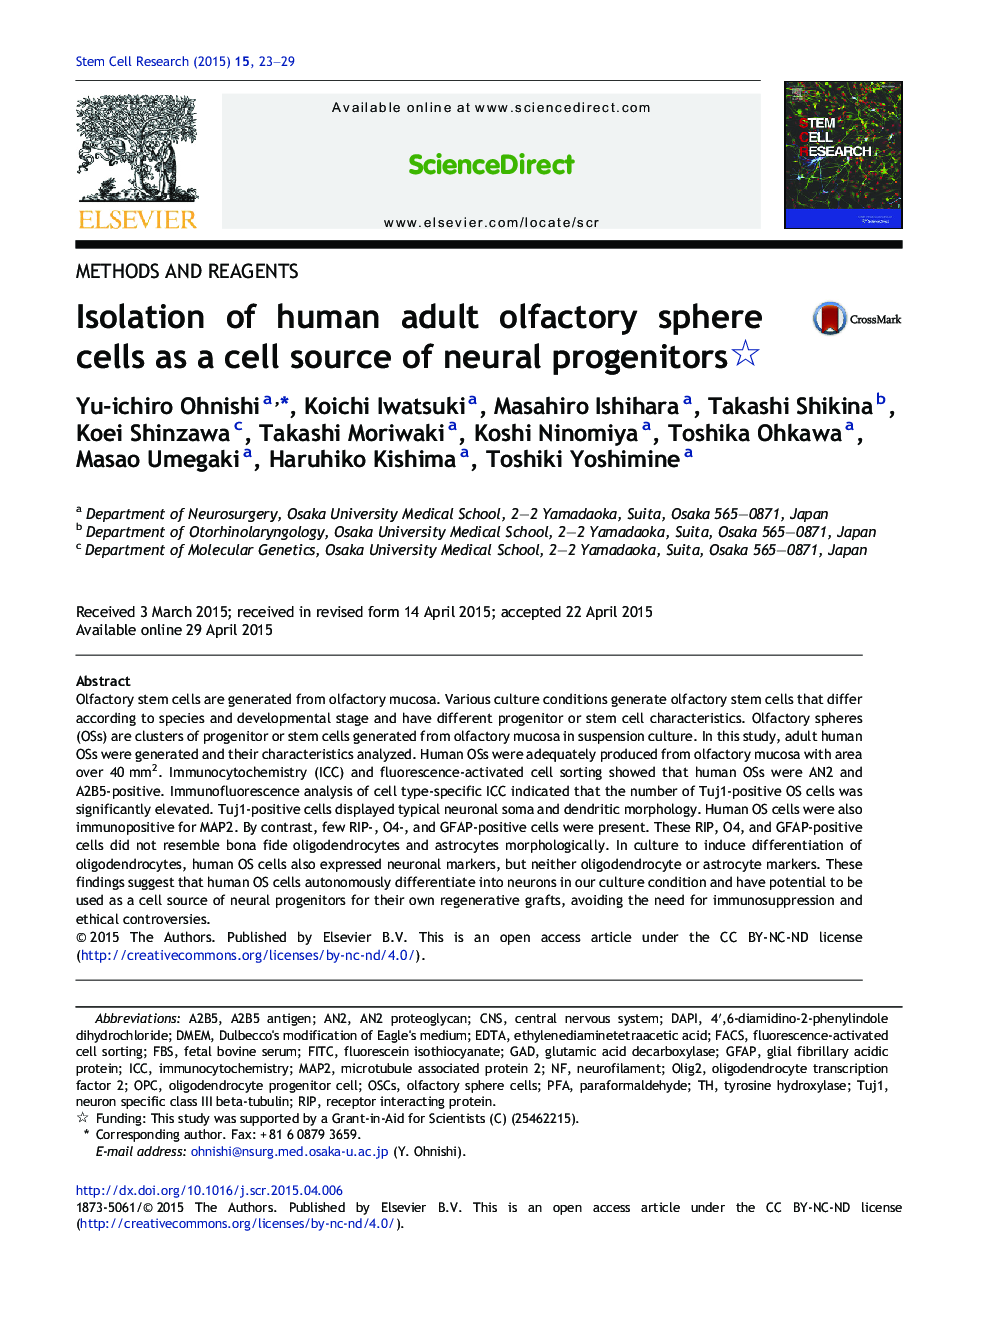 Isolation of human adult olfactory sphere cells as a cell source of neural progenitors 